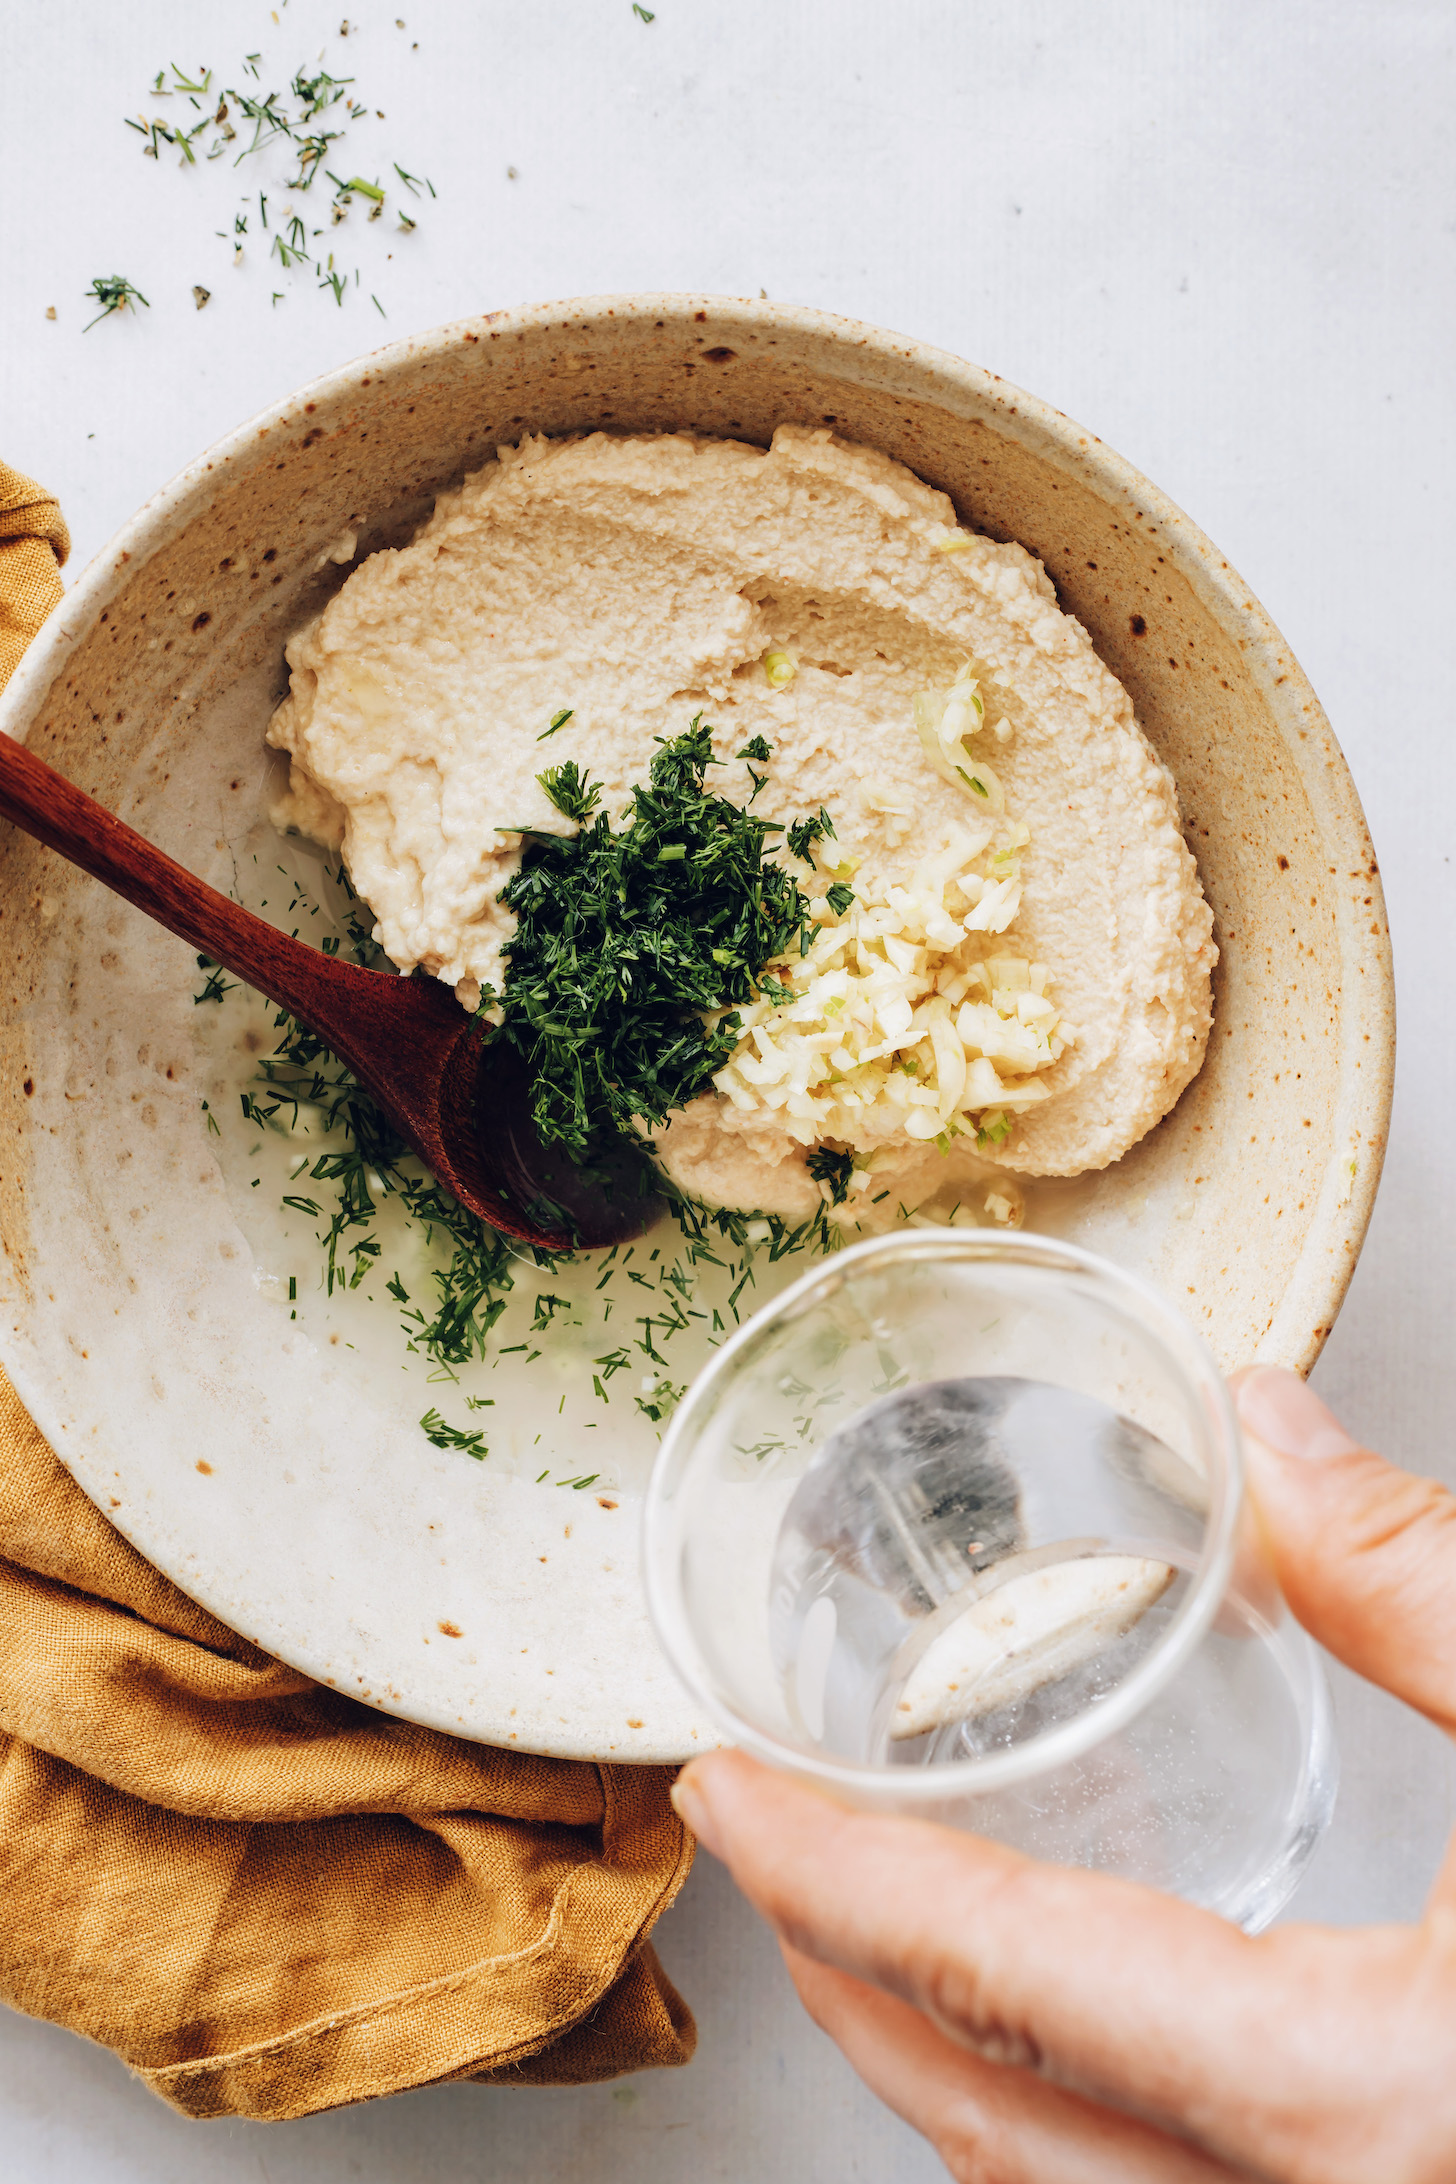 Pouring water into a bowl of hummus, garlic, lemon juice, and dill